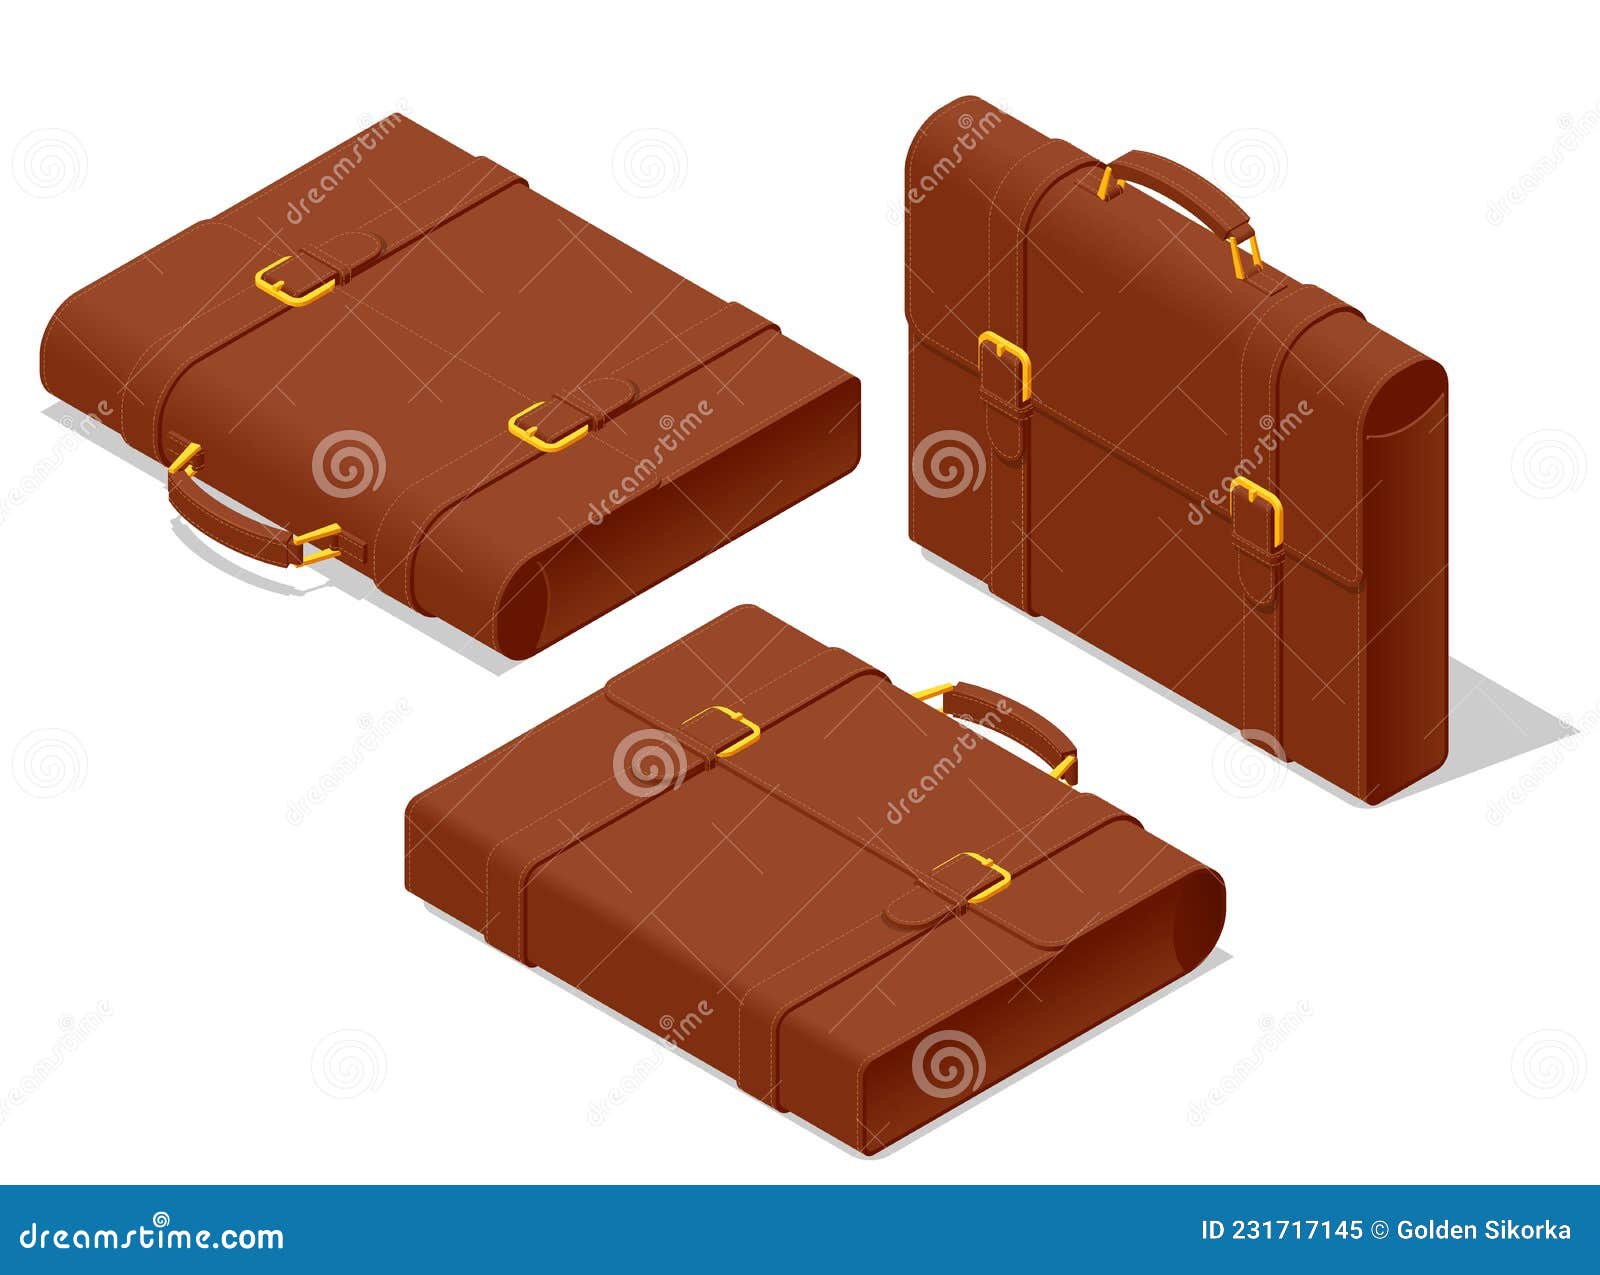 isometric briefcase icons set on white background. diplomat, for office, for laptop.